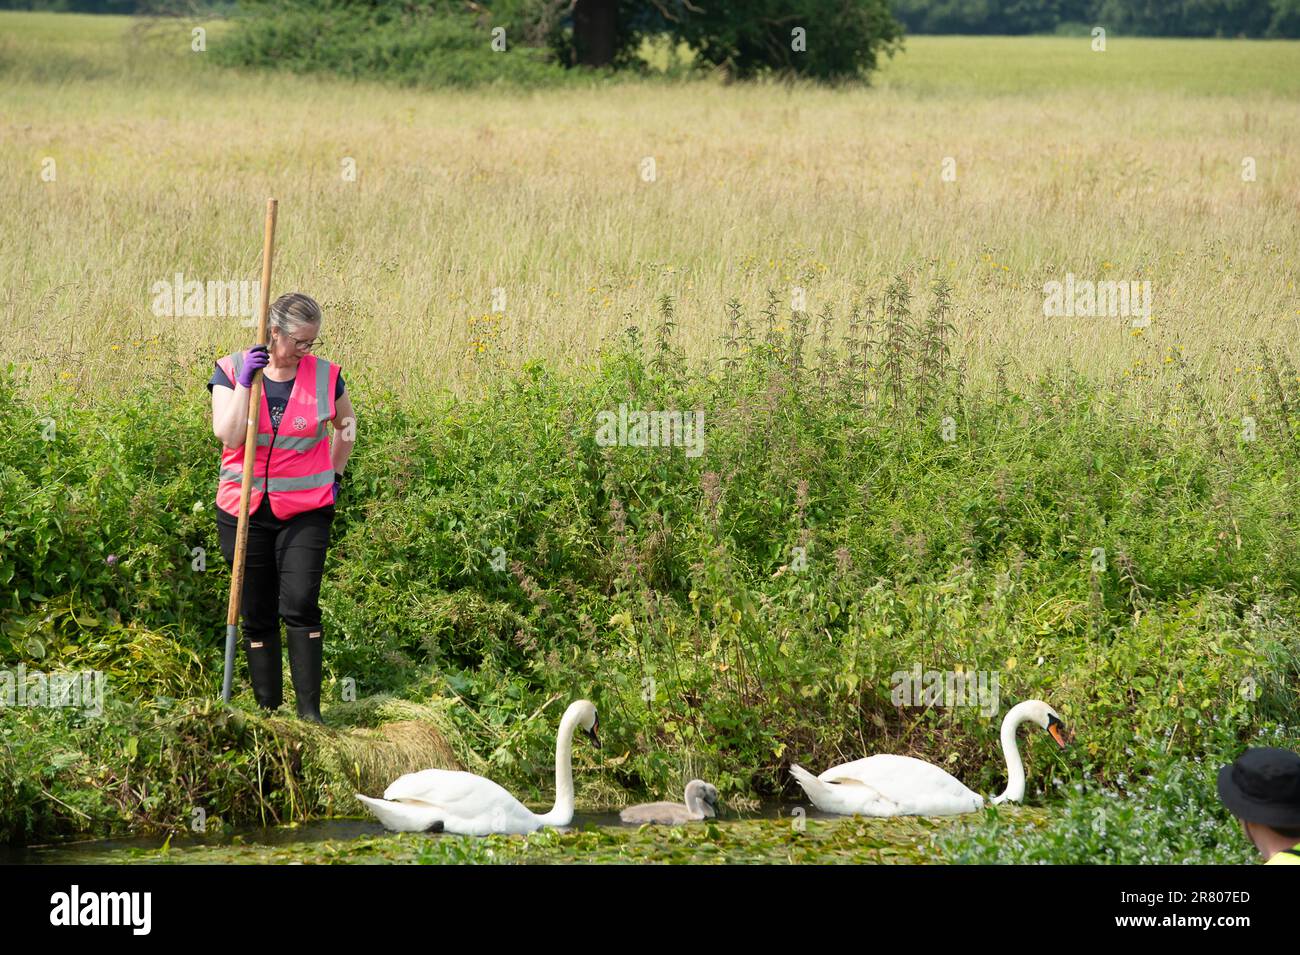 Eton Wick, UK. 18th June, 2023. Work stops to let a swan and her cygnets pass by. Local residents and volunteers from the Eton Wick Waterways Group near Windsor in Berkshire who are supported by Thames 21, were clearing weeds from Boveney Ditch in Eton Wick today so as to improve the flow of water in the waterway. They work to conserve and protect  the natural environment and wildlife surrounding the Eton Wick waterways. Joining them to clear the weeds were newly elected Windsor, Eton and Eton Wick Liberal Democrats Councillors, Devon Davies and Mark Wilson. Frank O’Kelly a Councillor from nea Stock Photo